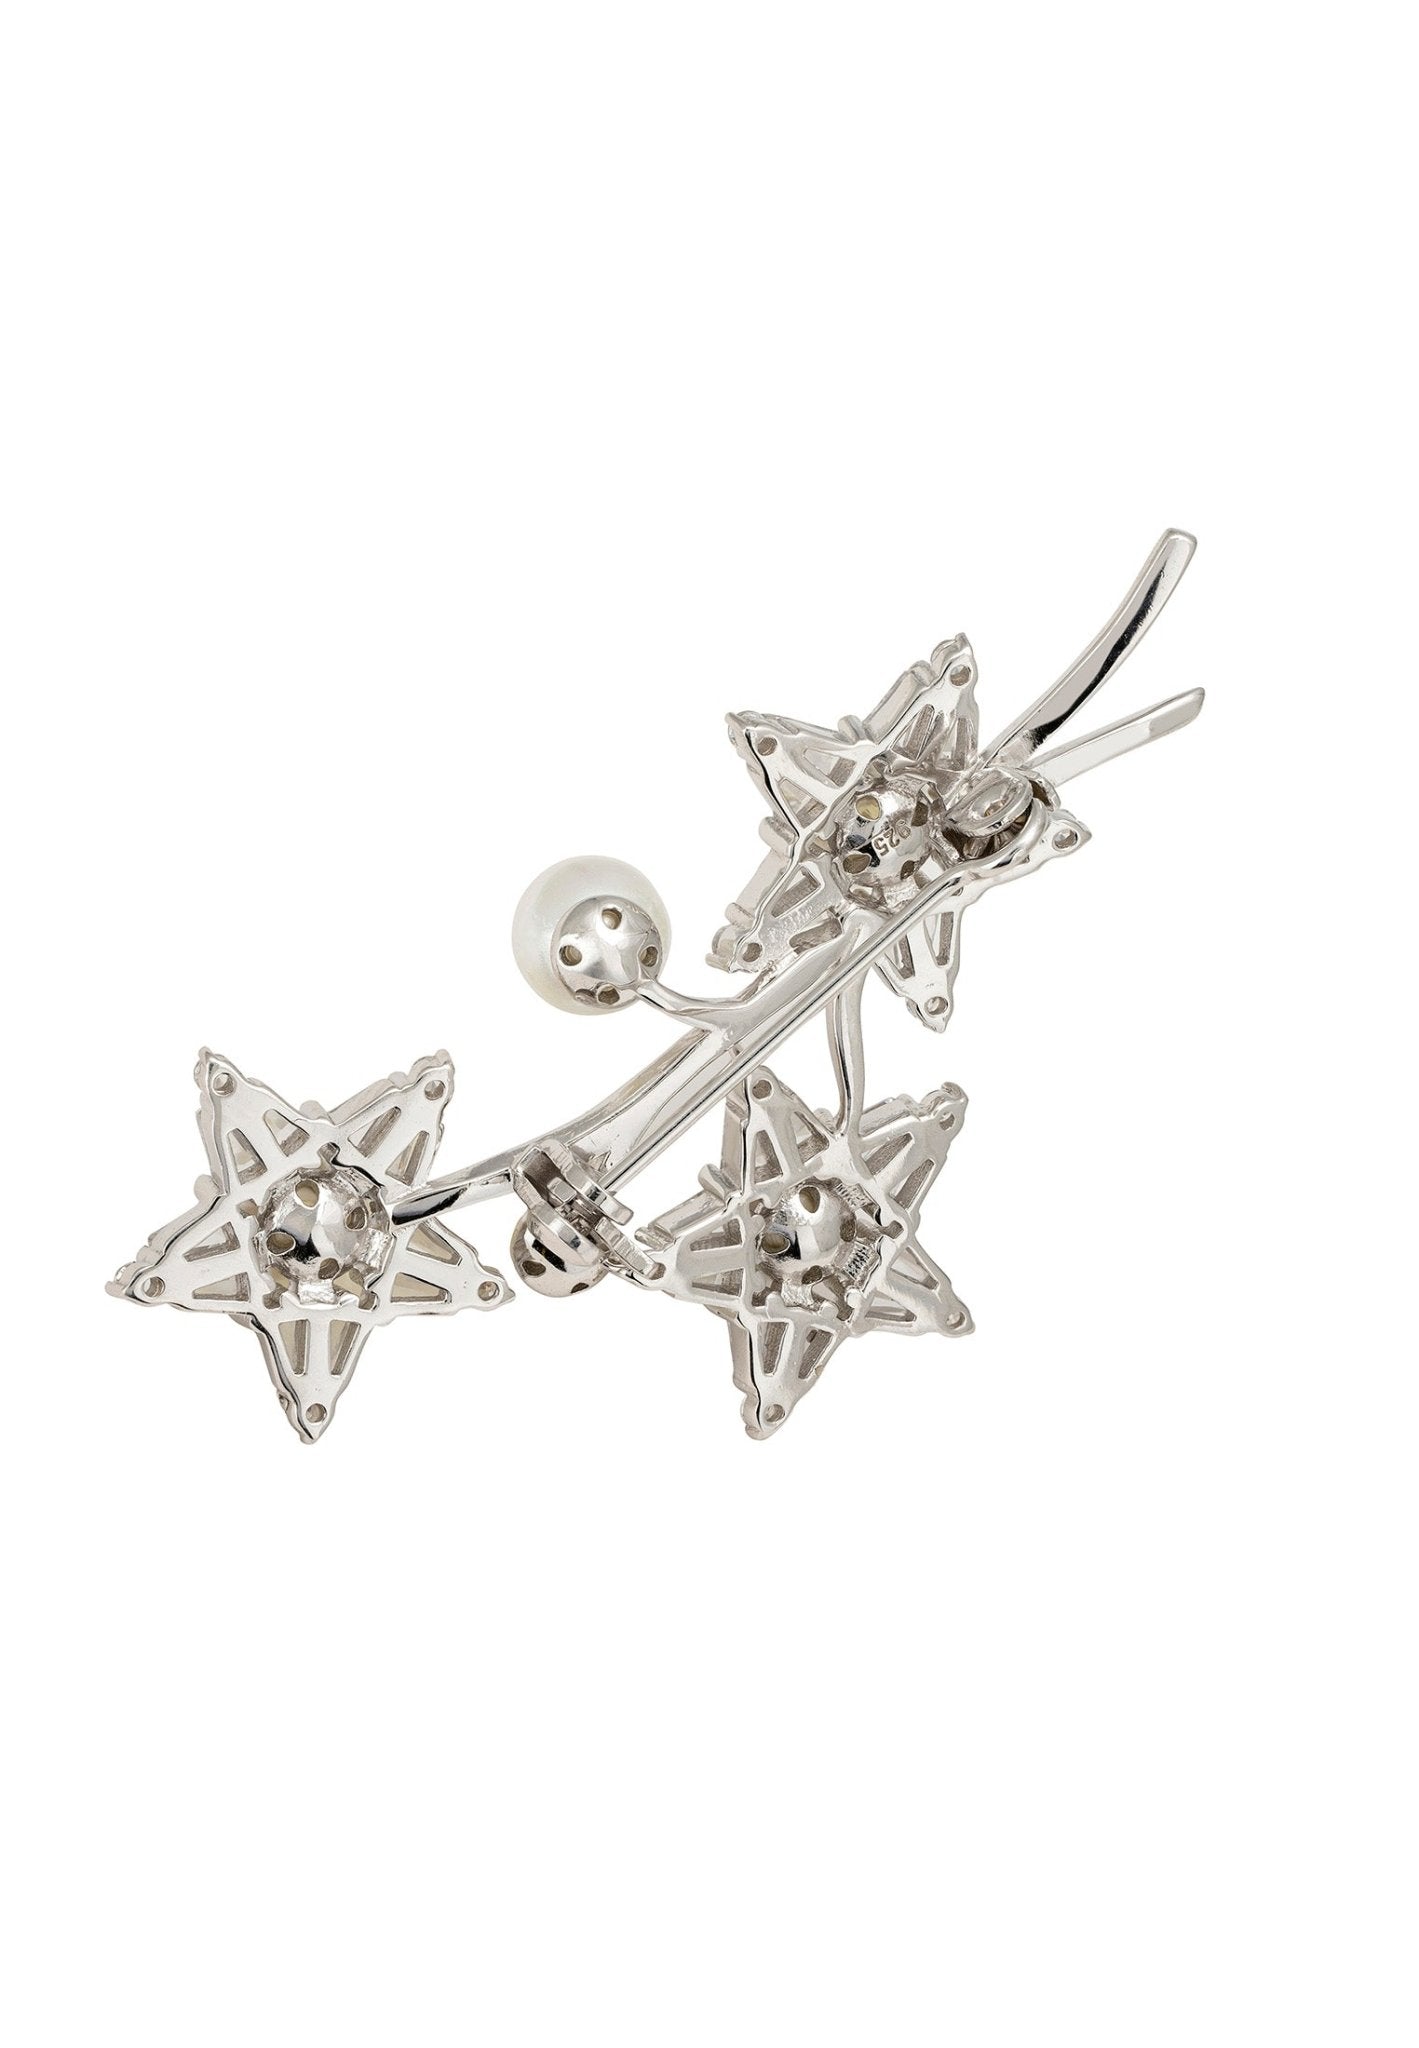 Starry Night Pearl Brooch Silver - LATELITA Brooches